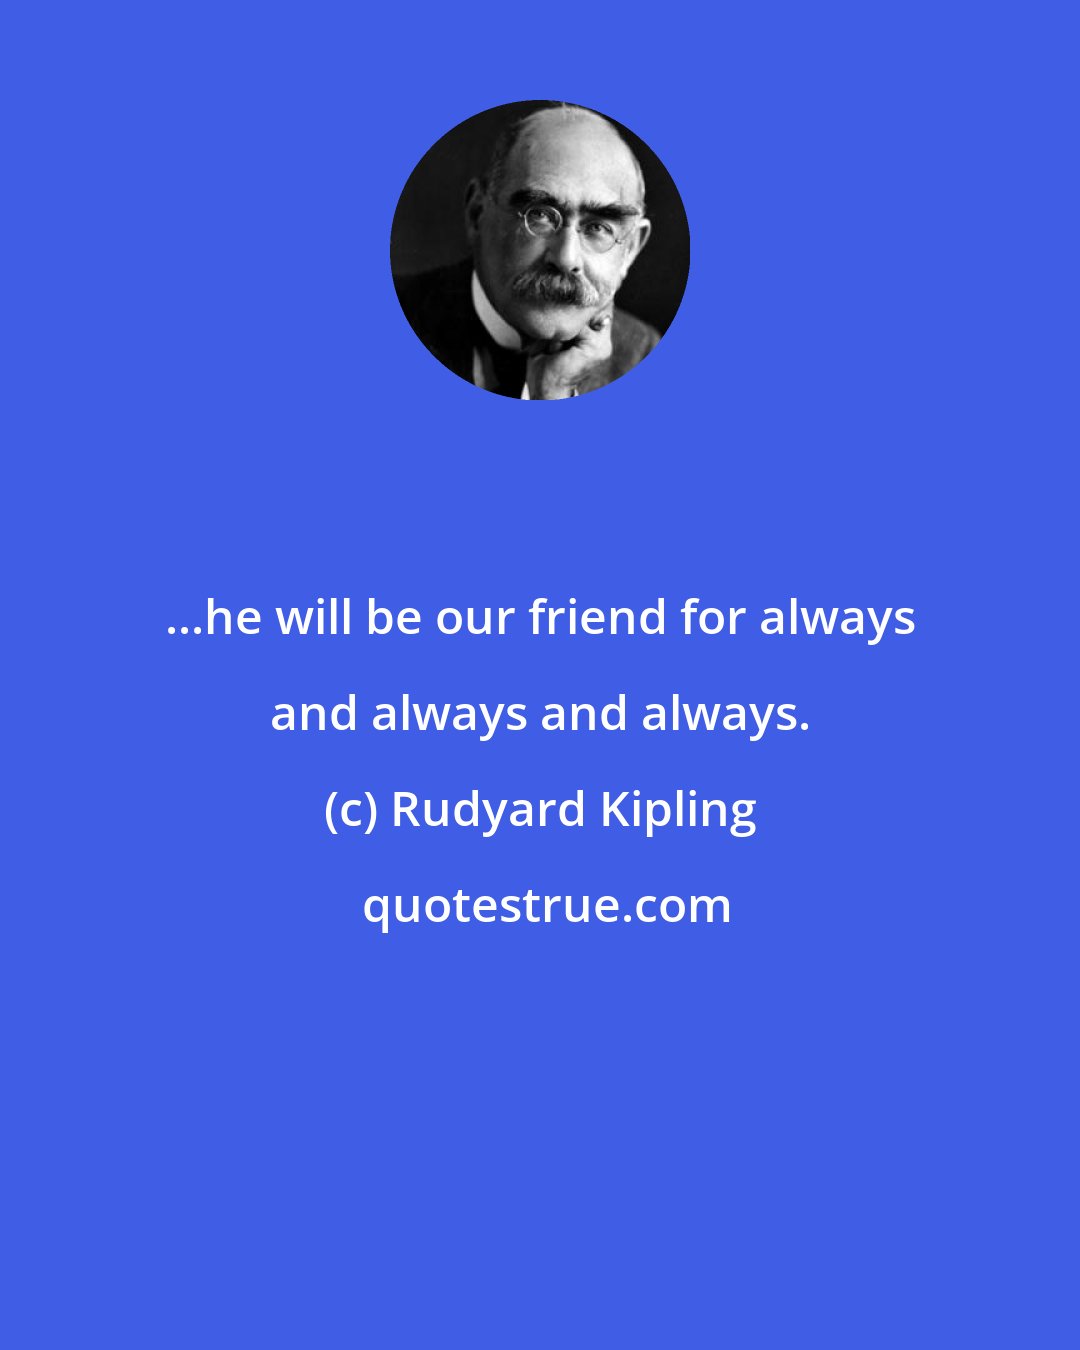 Rudyard Kipling: ...he will be our friend for always and always and always.